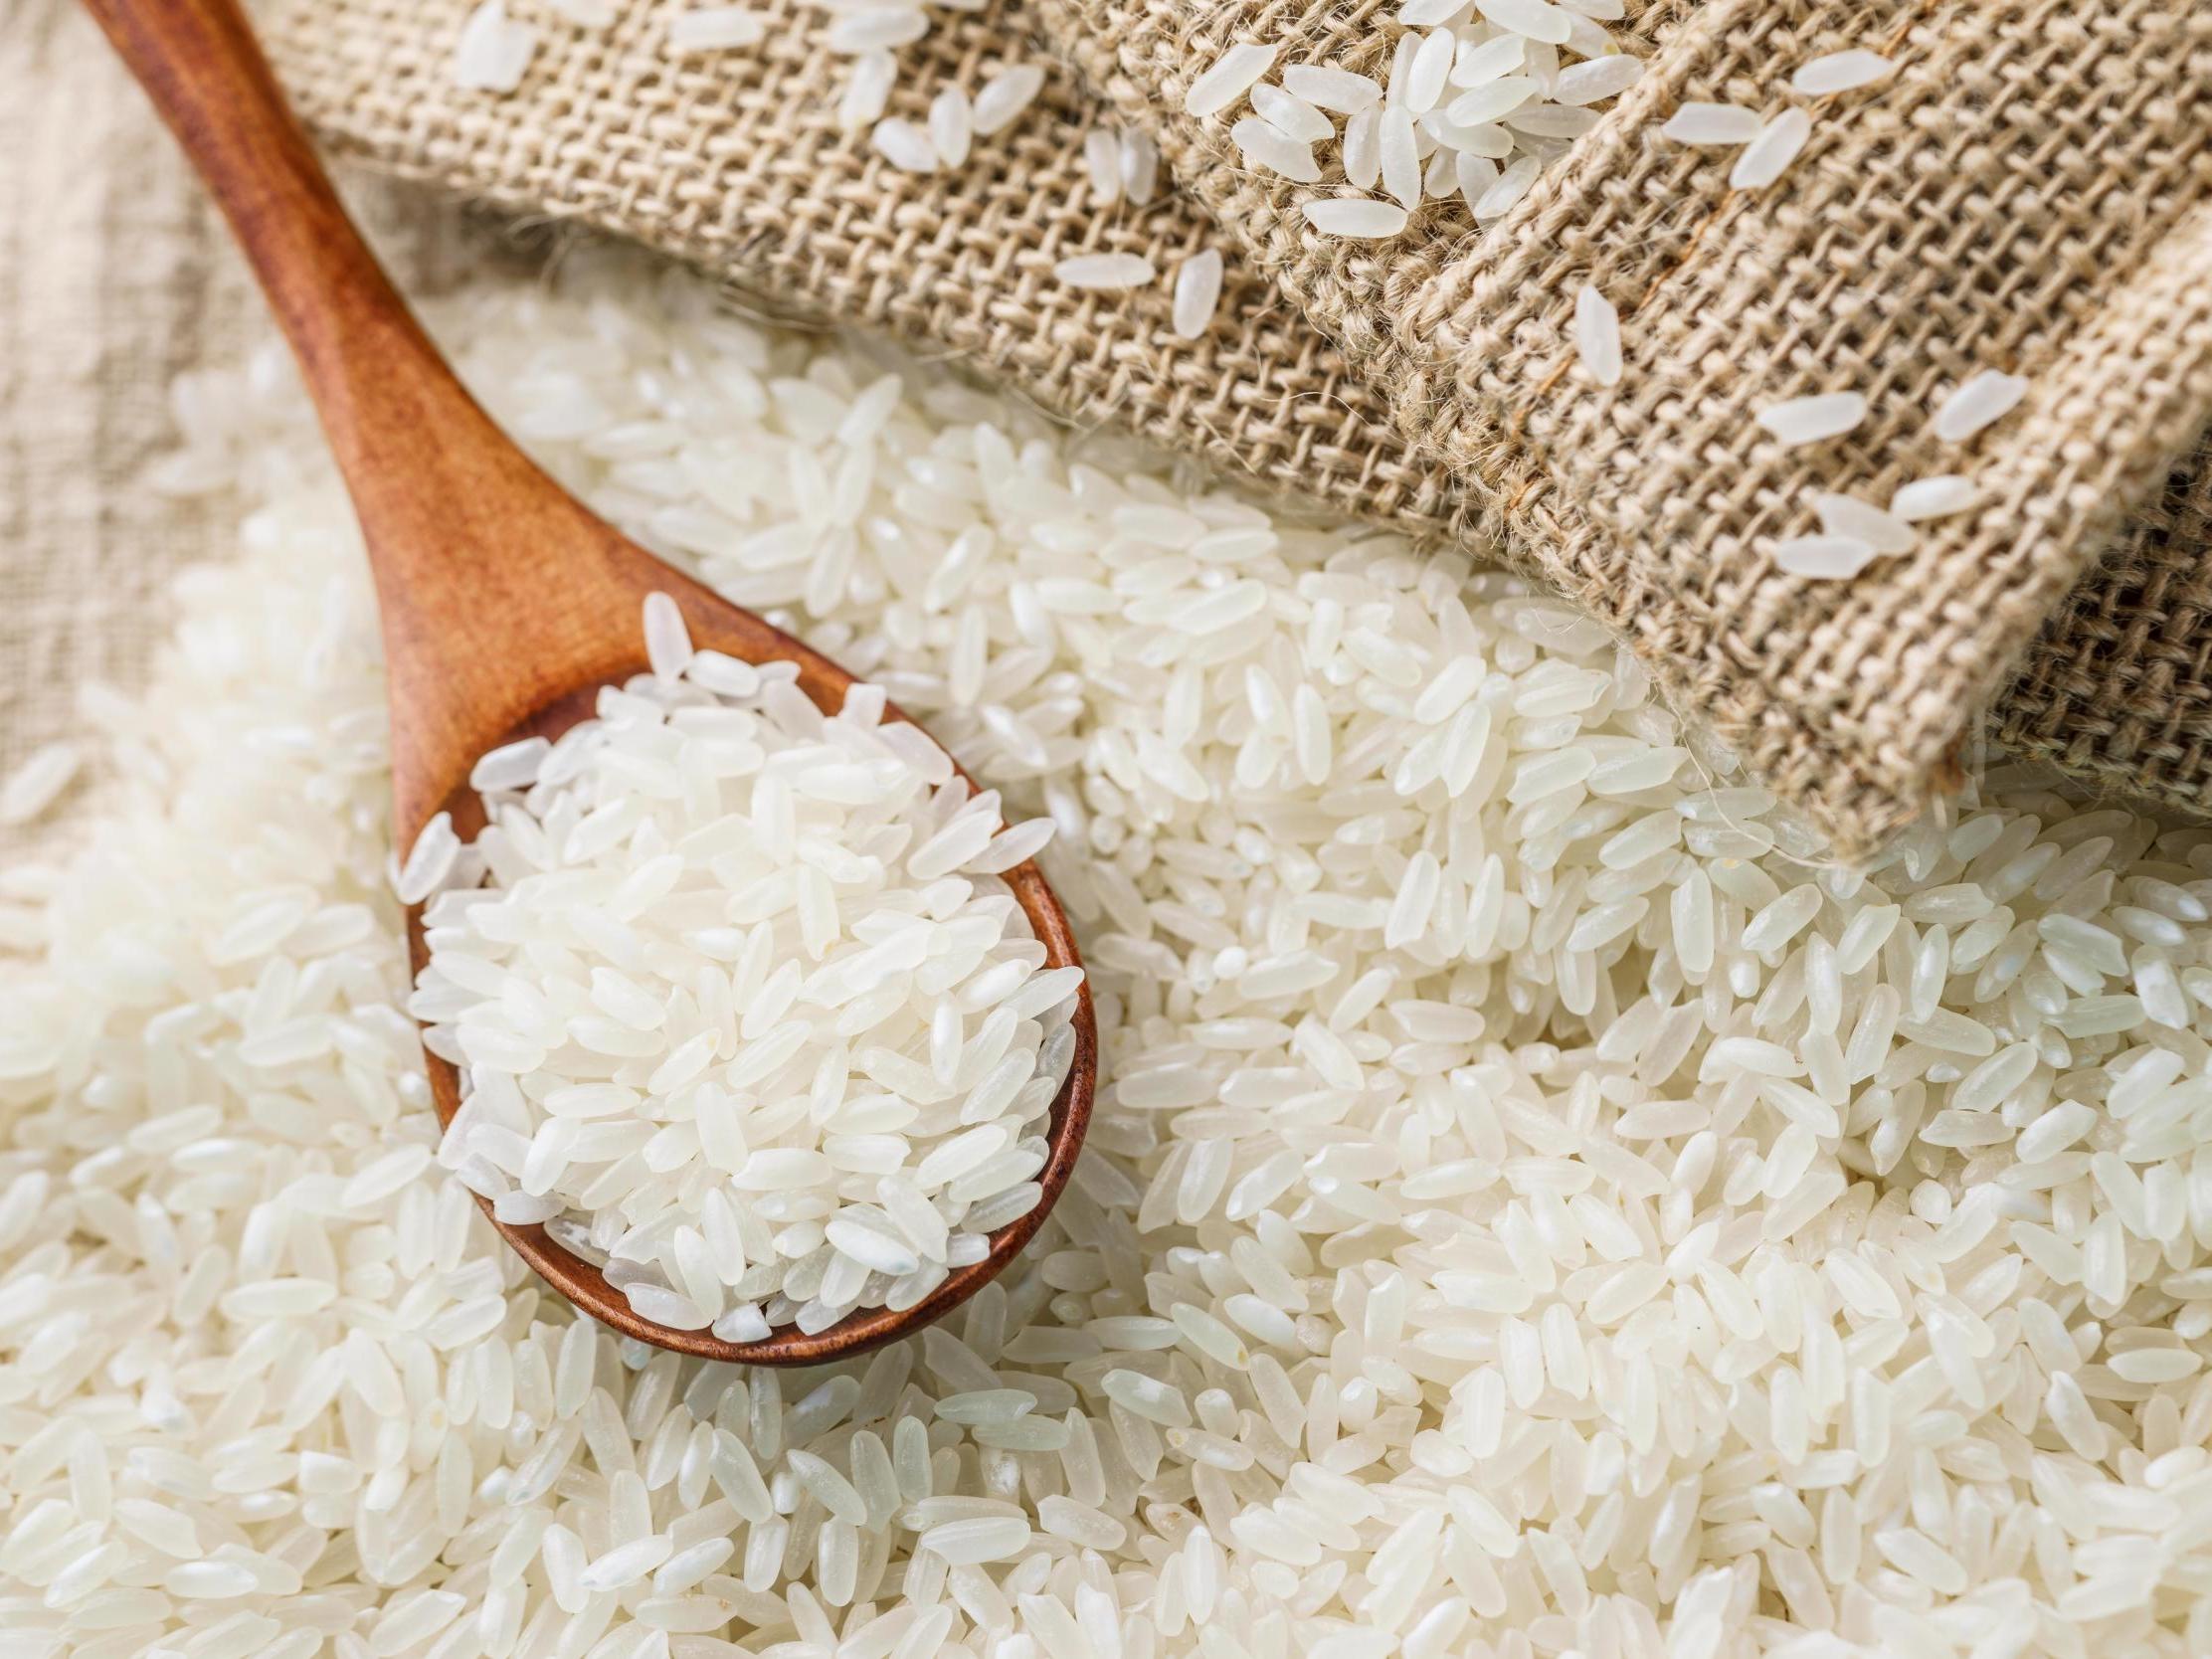 Scientists say they have developed a strain of rice that can tackle hypertension with no obvious side effects